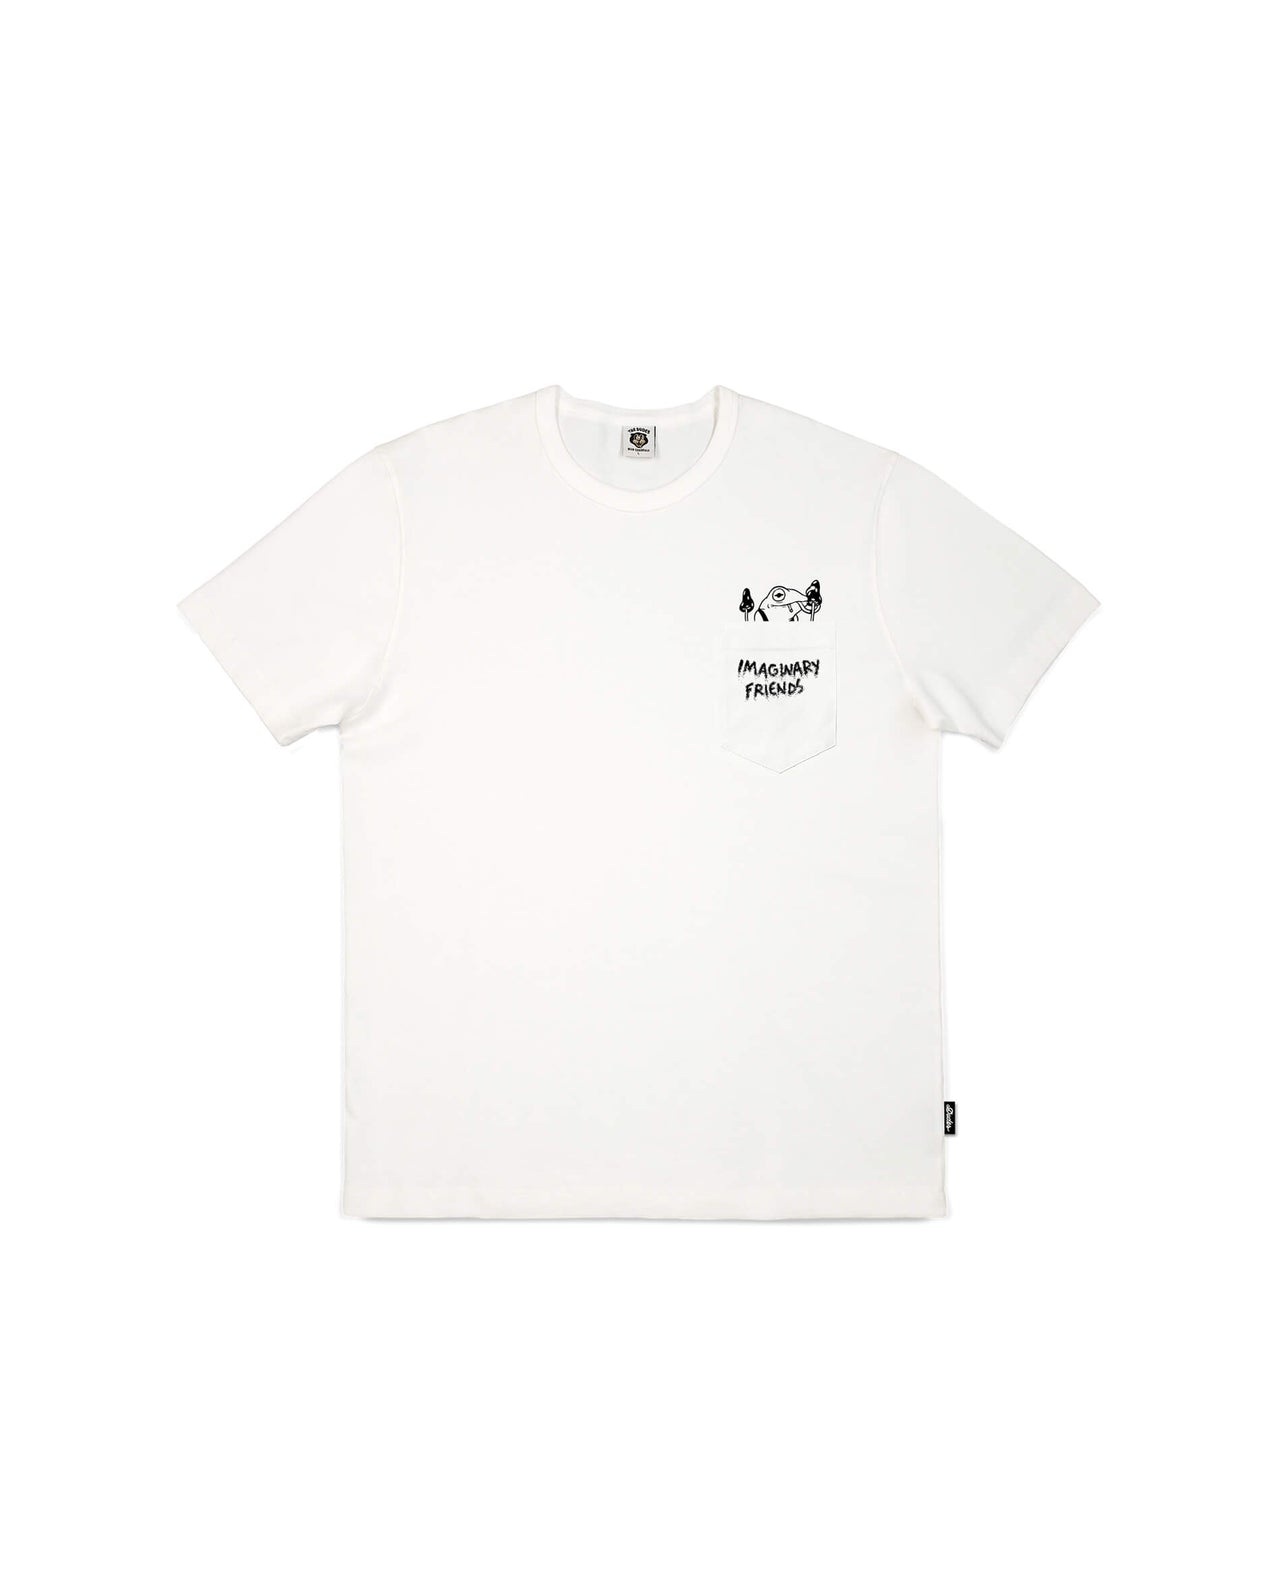 The Dudes Imaginary Friends Tee